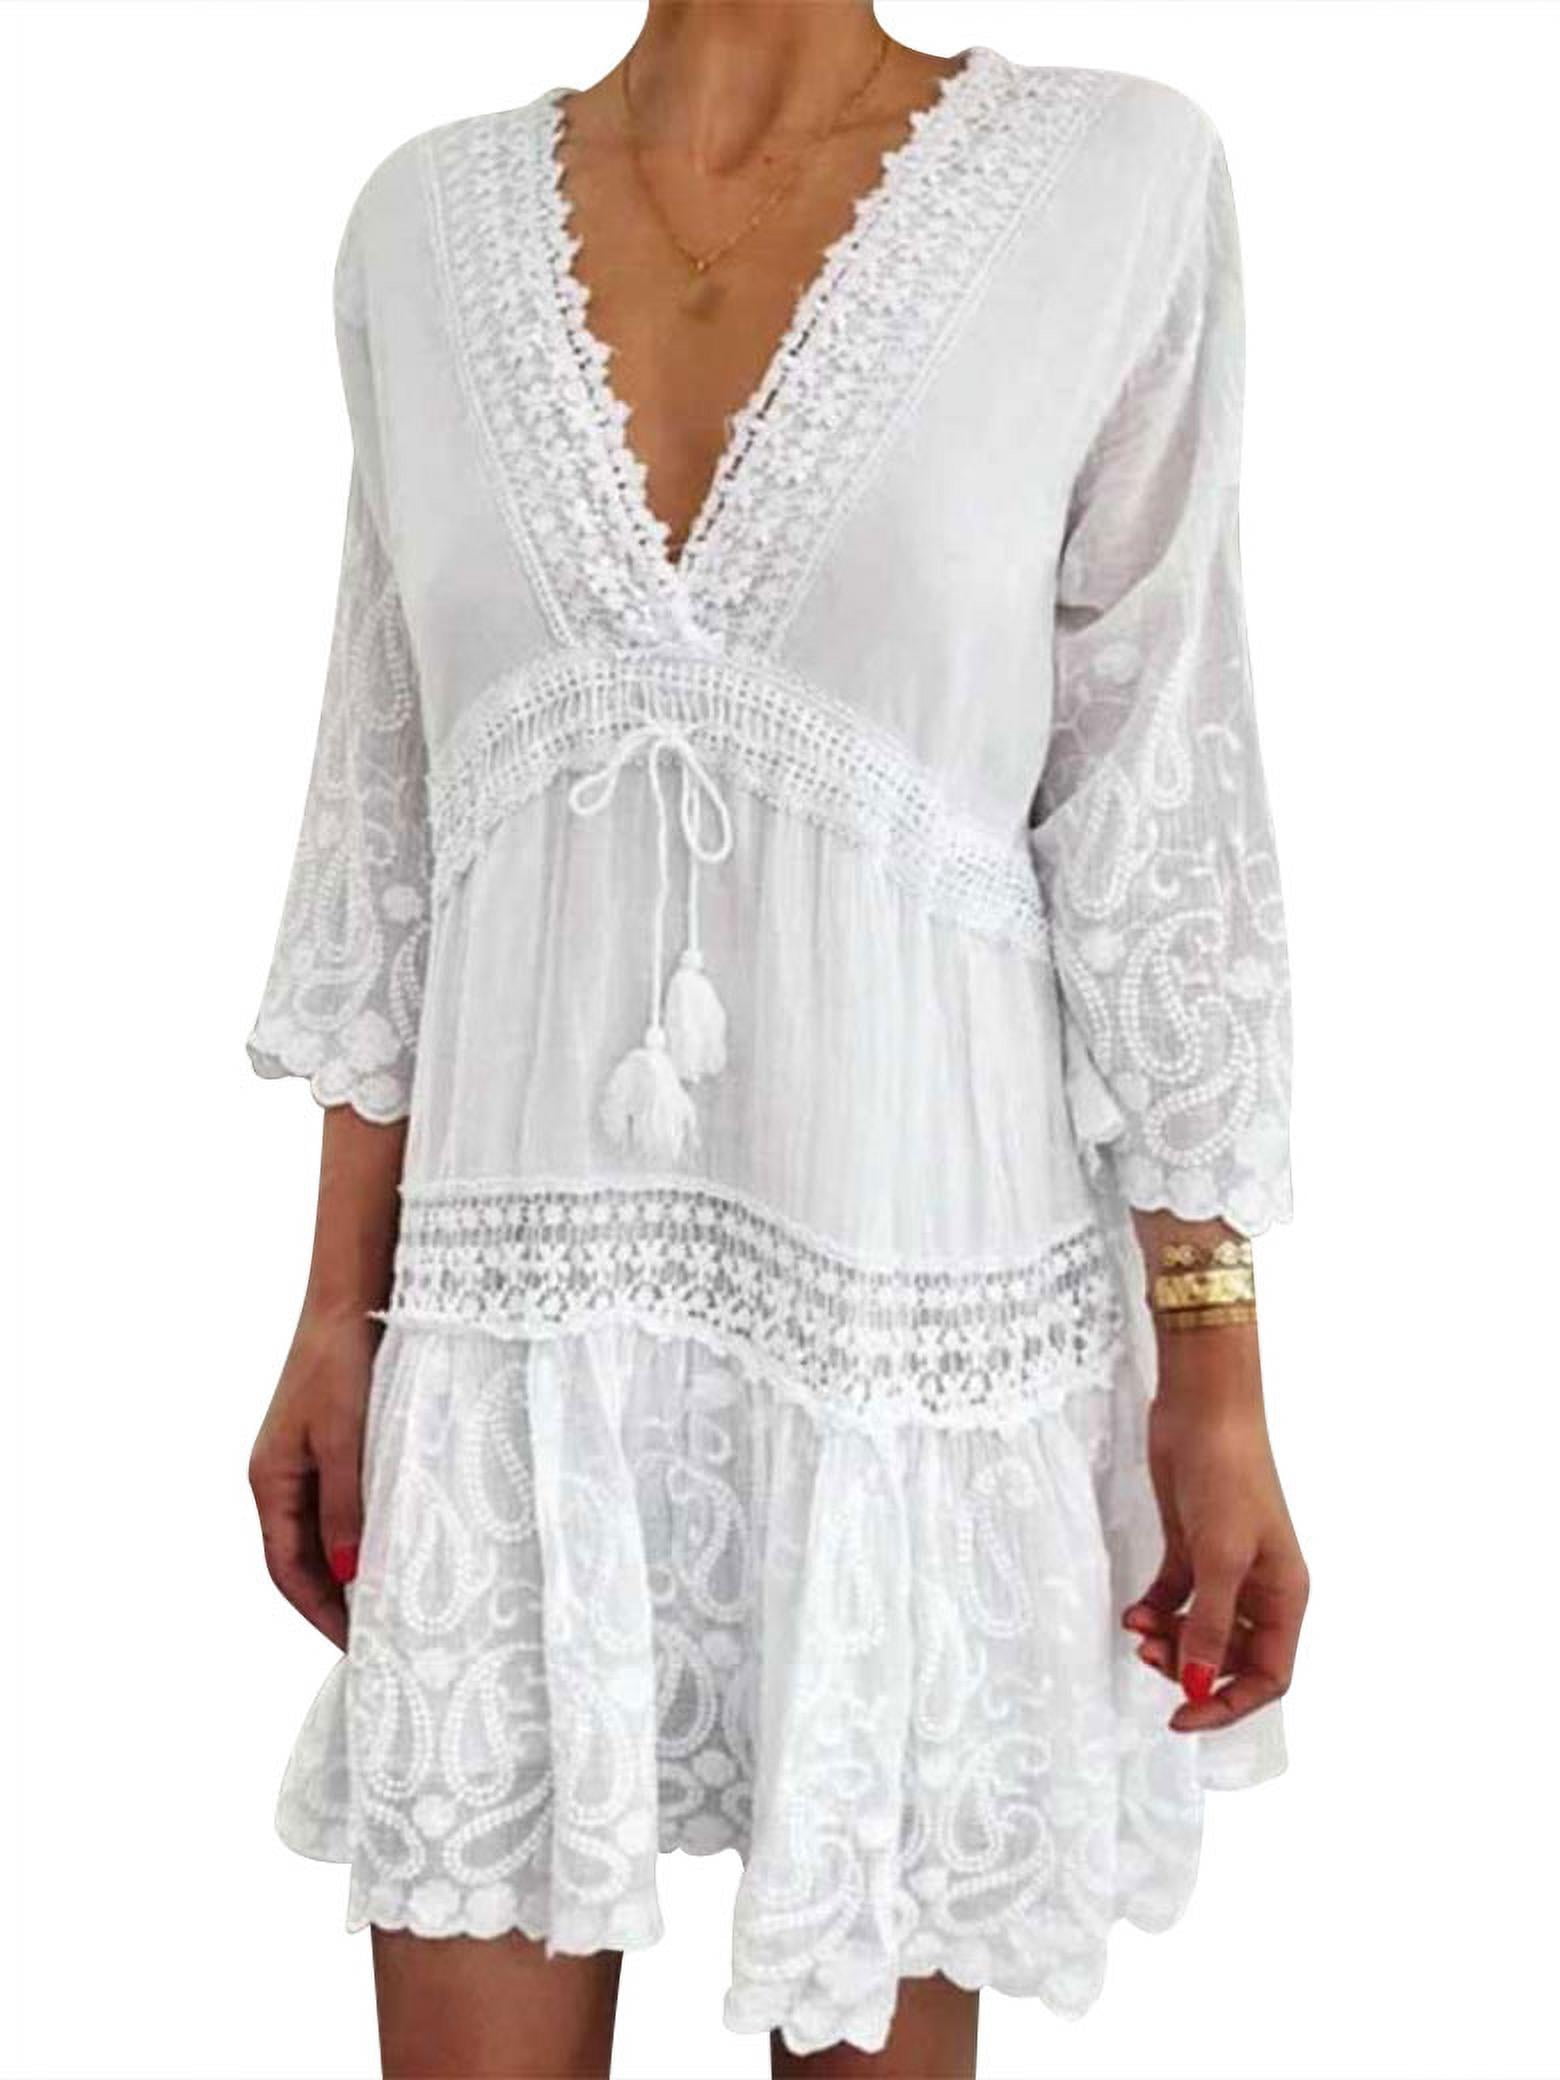 ZXZY Women Floral Printed Lace V Neck 3/4 Sleeves Beach Mini Dress 